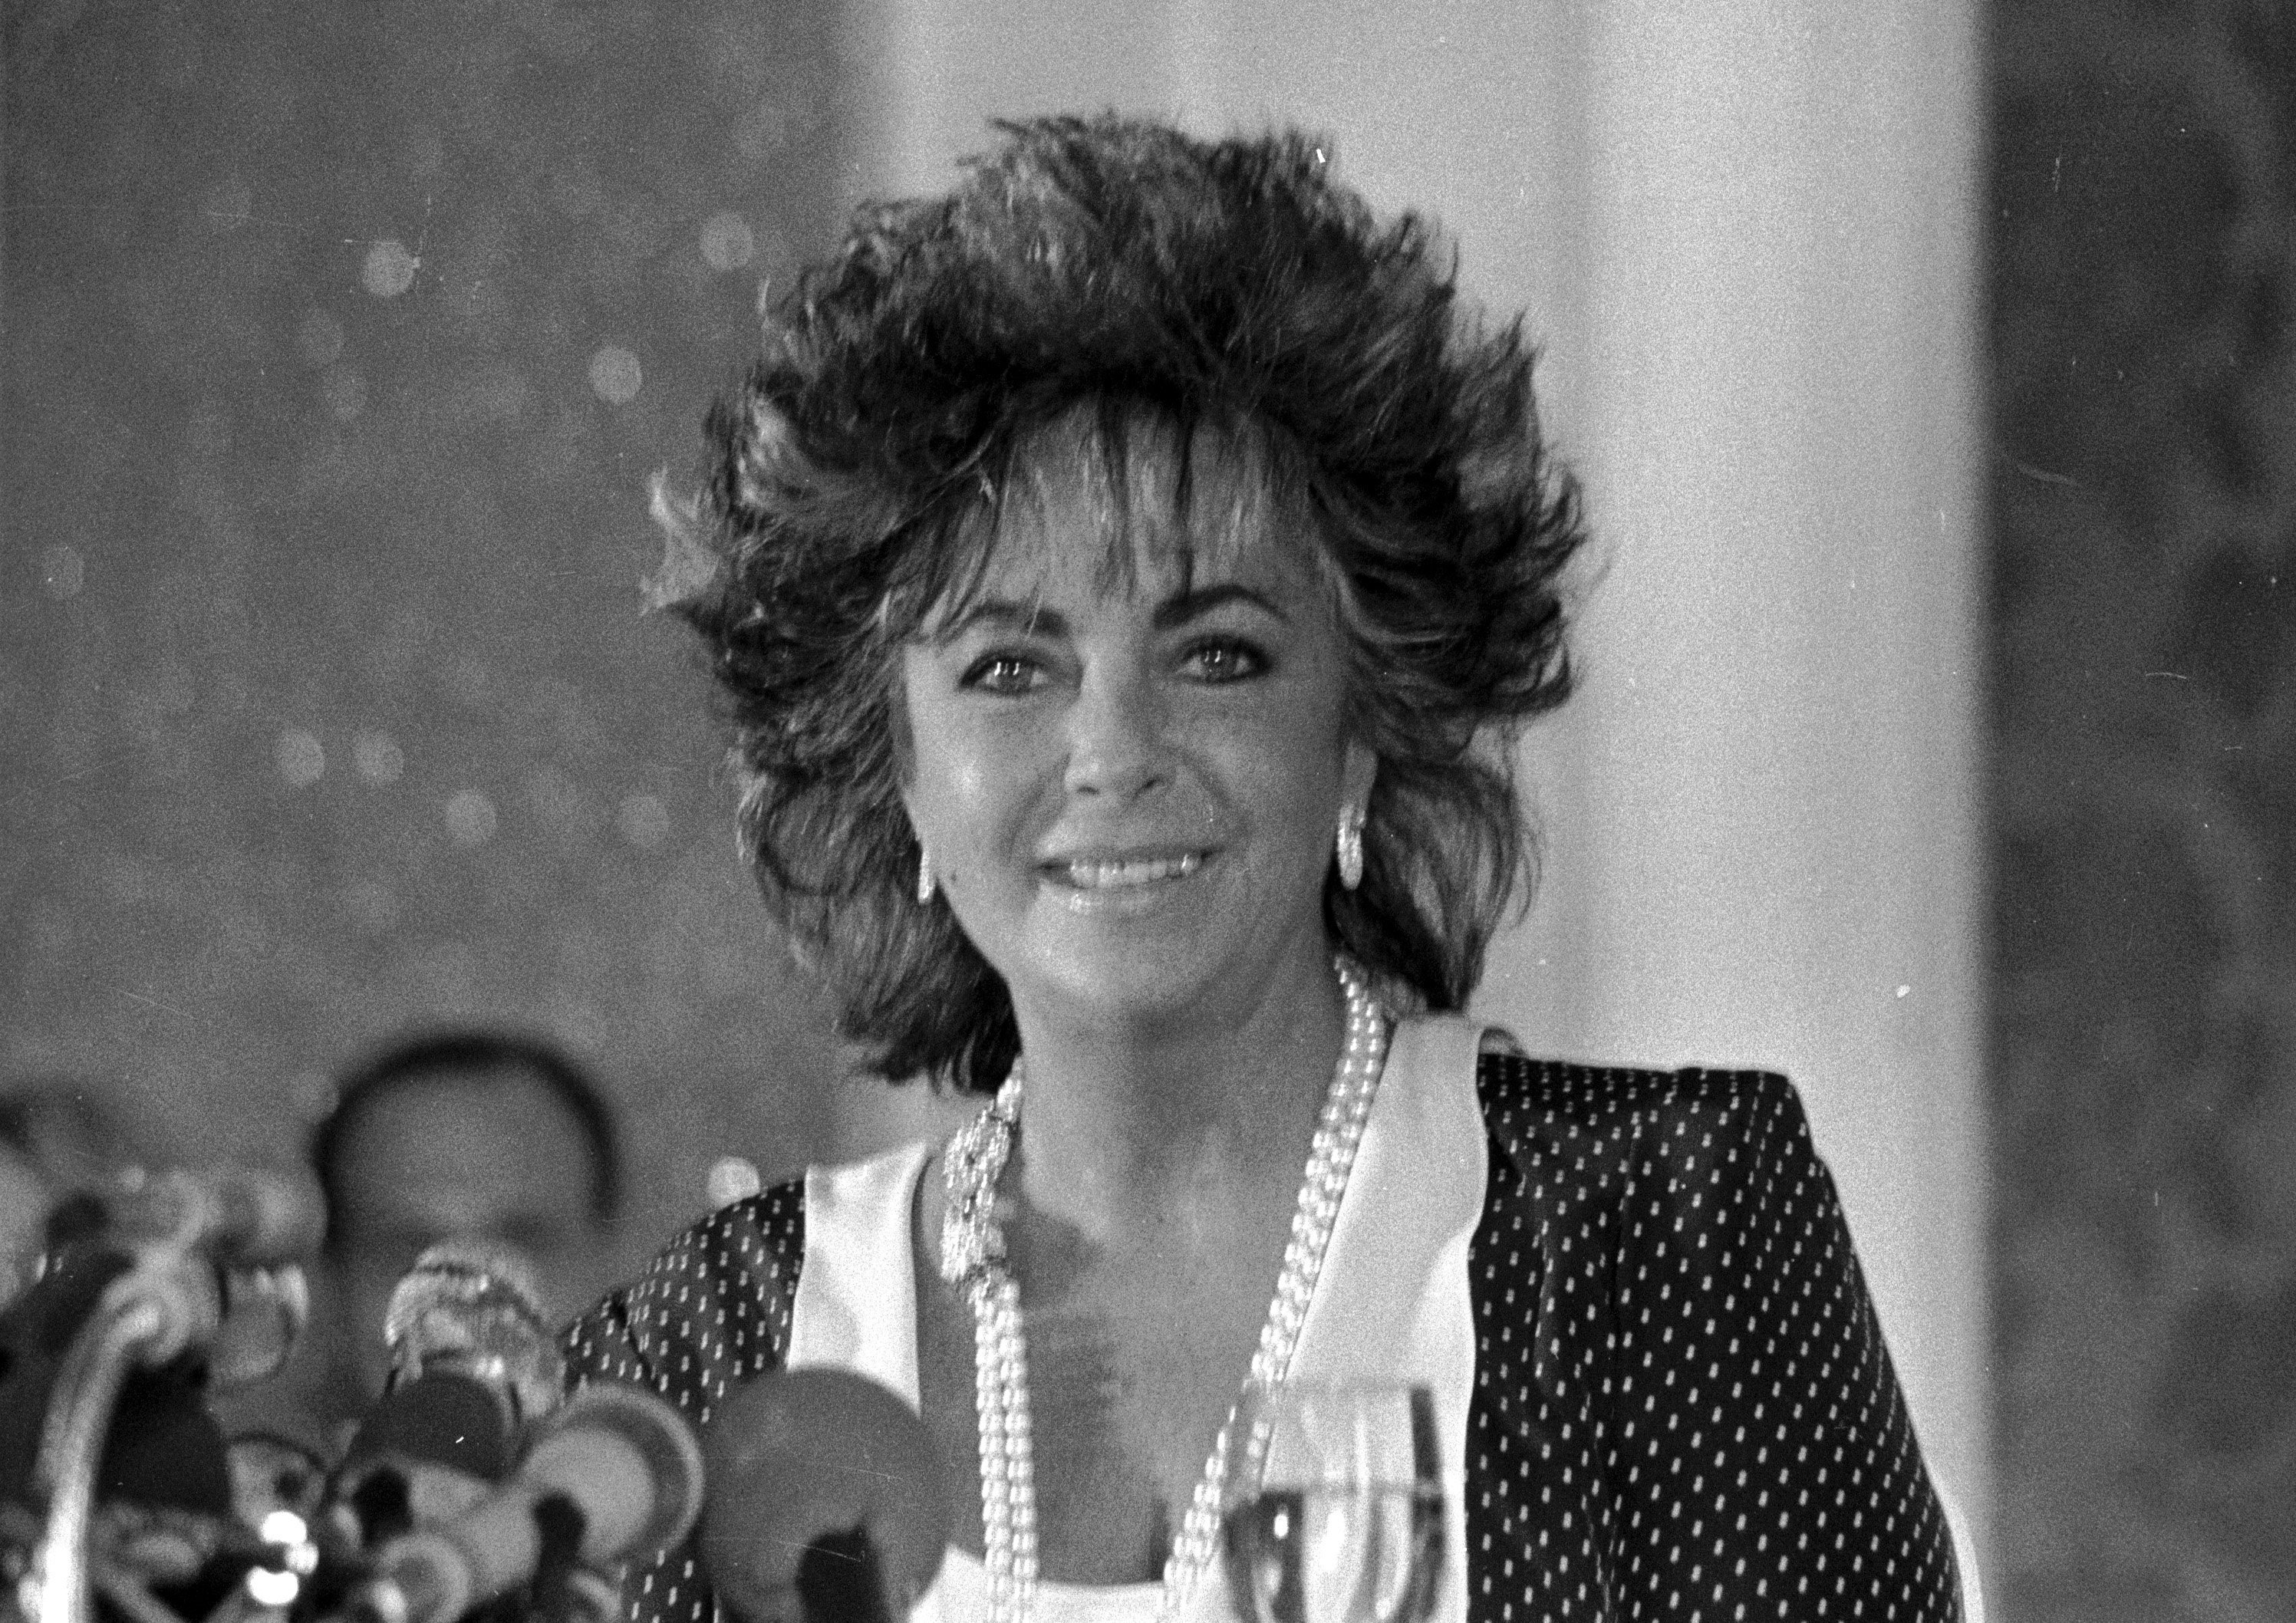 Elizabeth Taylor at the American Film Festival of Deauville in Normandy, France in 1985. | Source: Wikimedia Commons